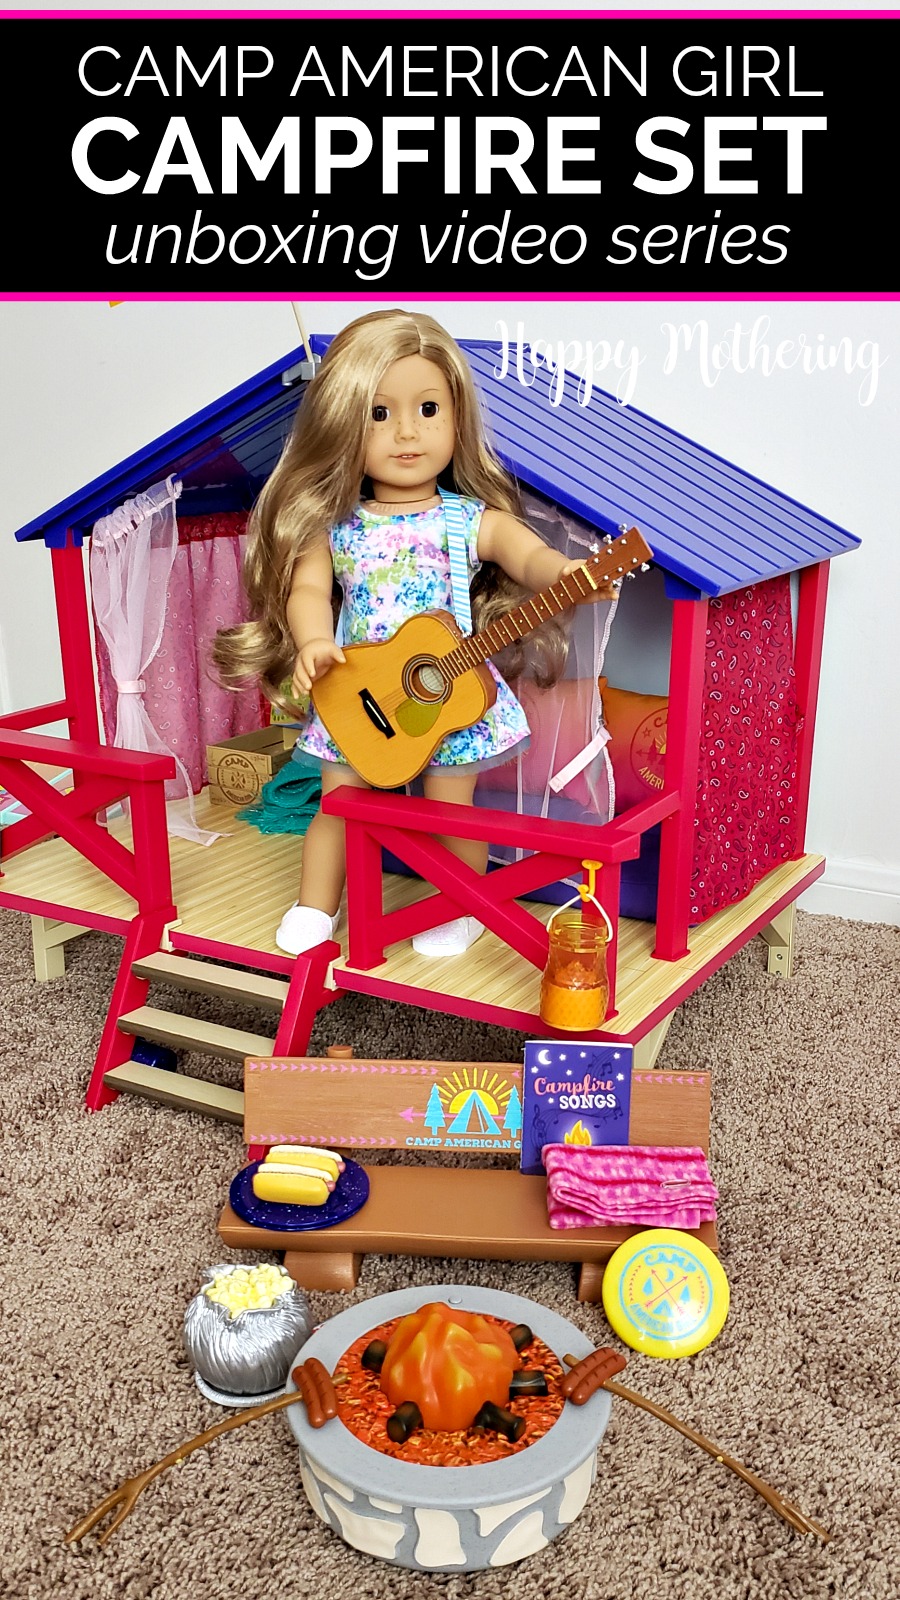 Do you want to see the Camp American Girl Campfire set up close? Watch Kaylee and I unbox it and get a peek at each included accessory!